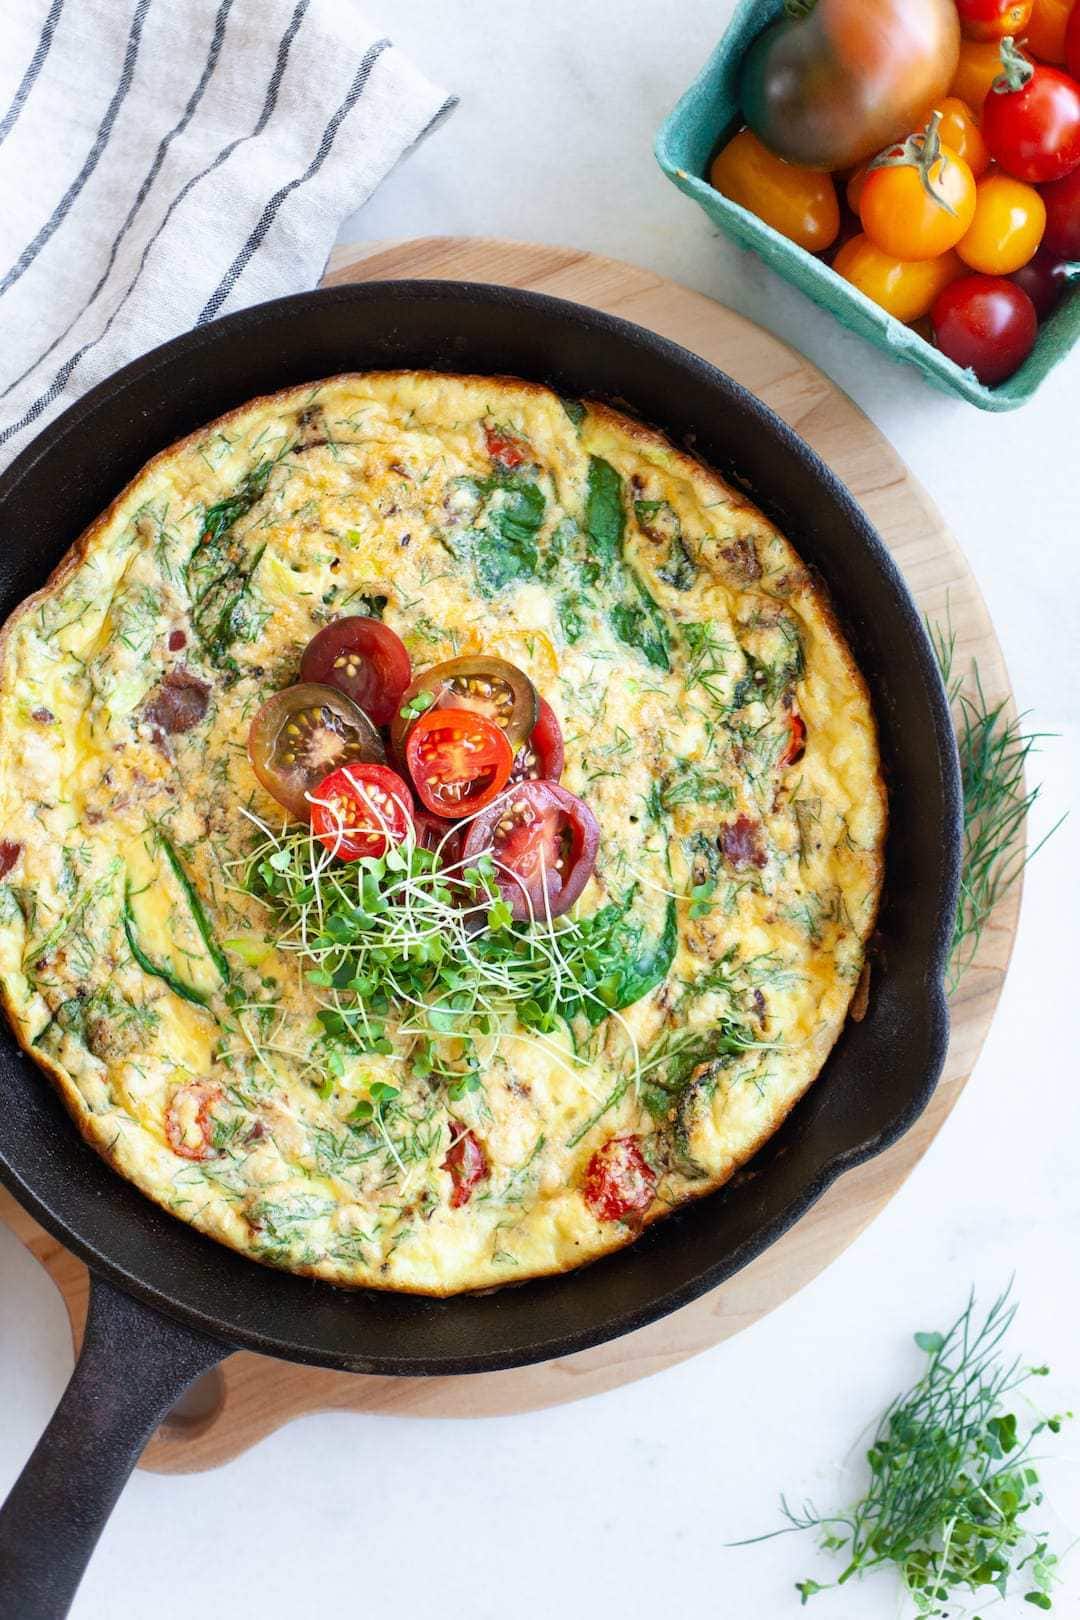 image of a cast iron skillet with a frittata inside topped with tomatoes and micro greens